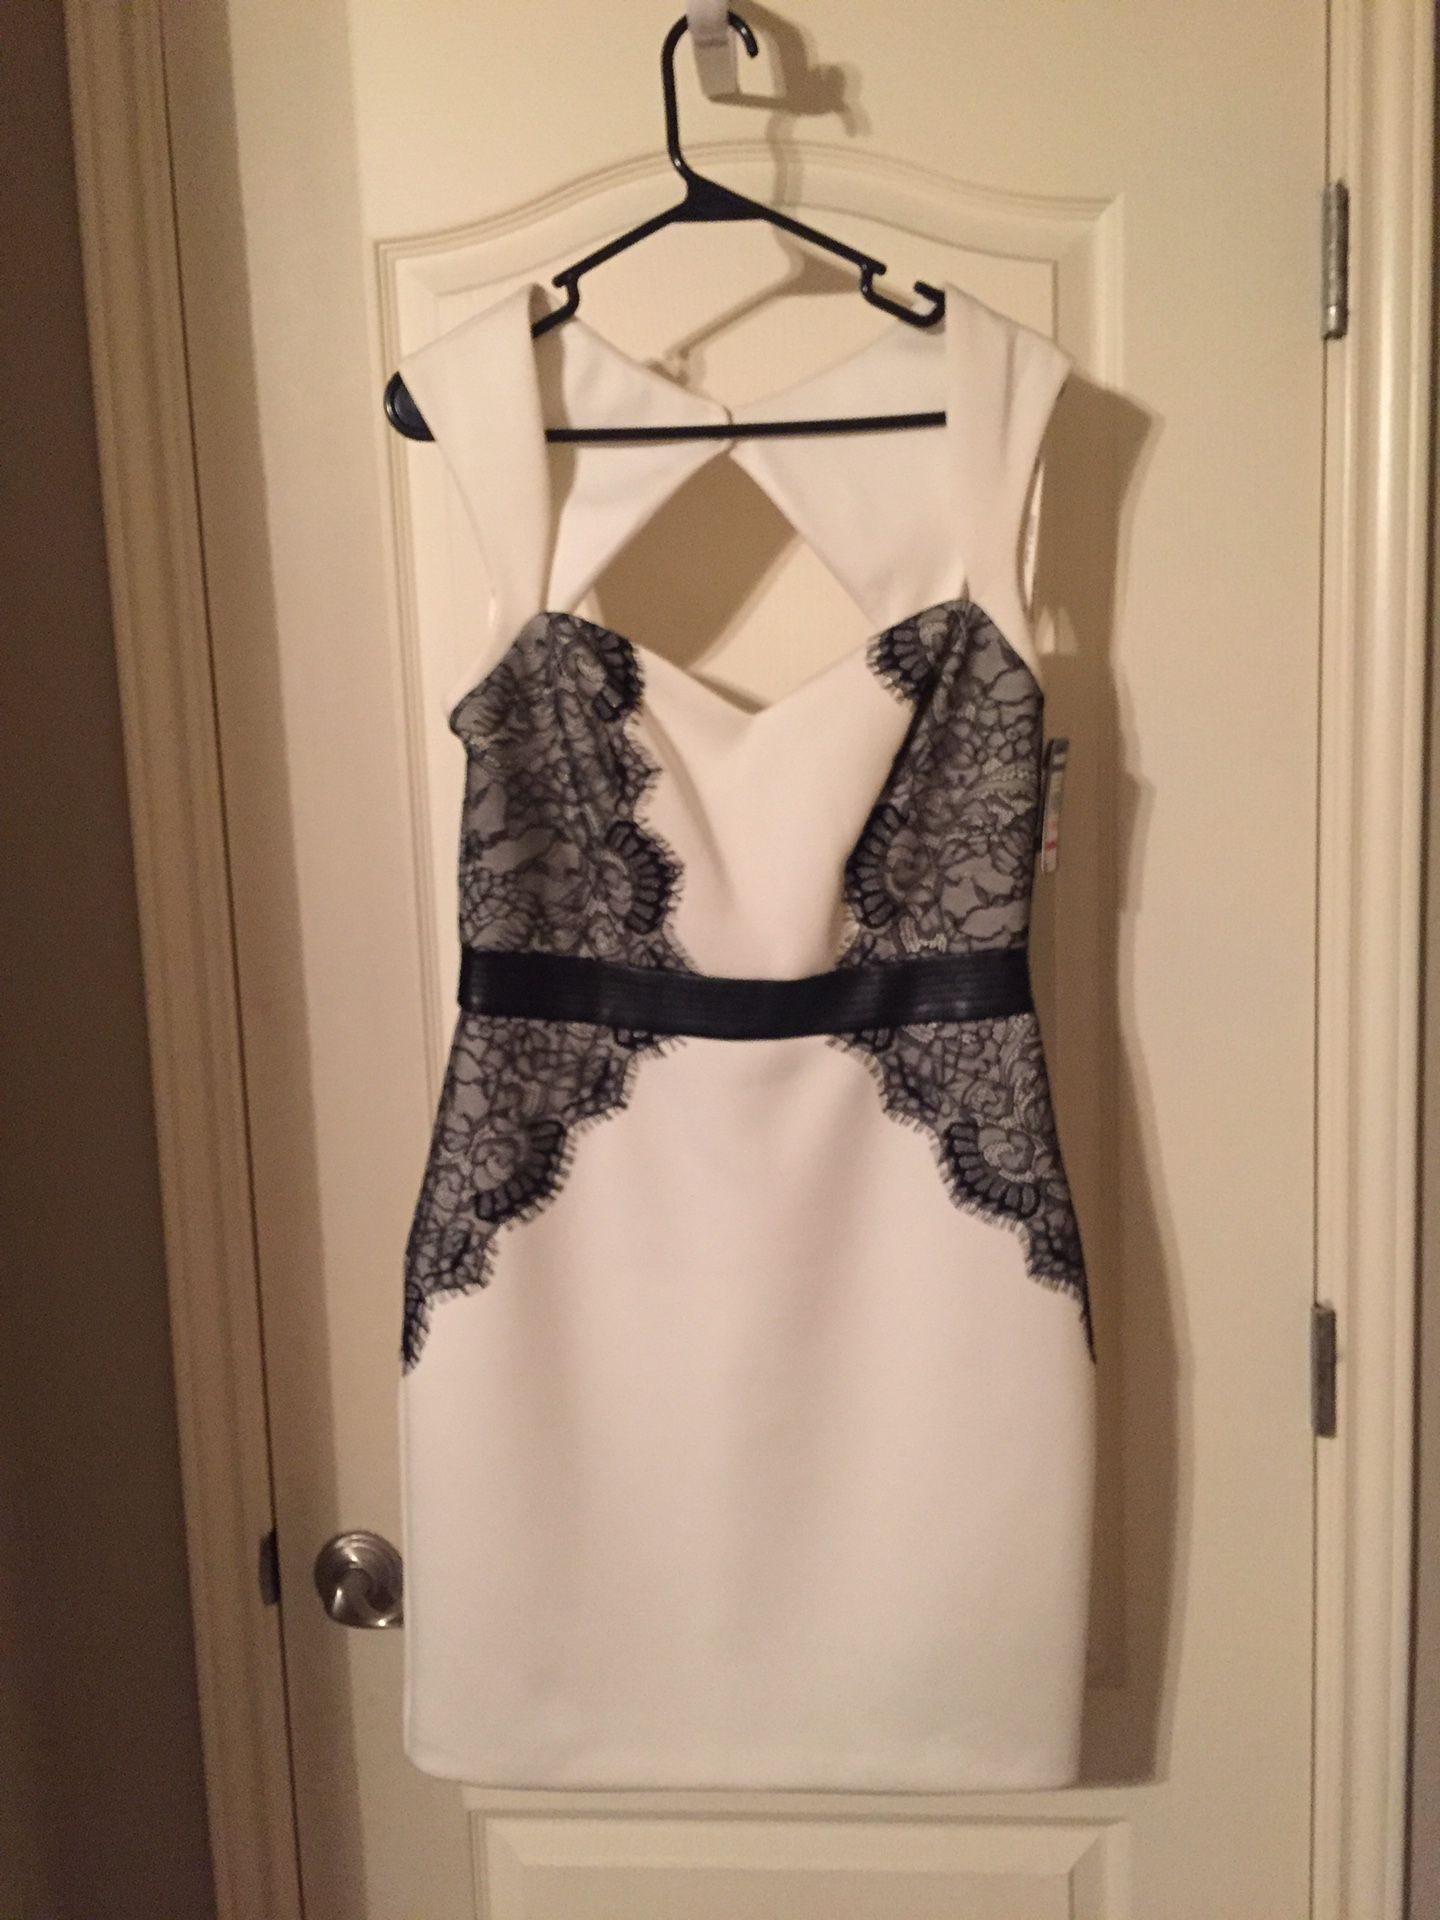 Calvin Klein black and white cocktail dress (size 10) - New with tags